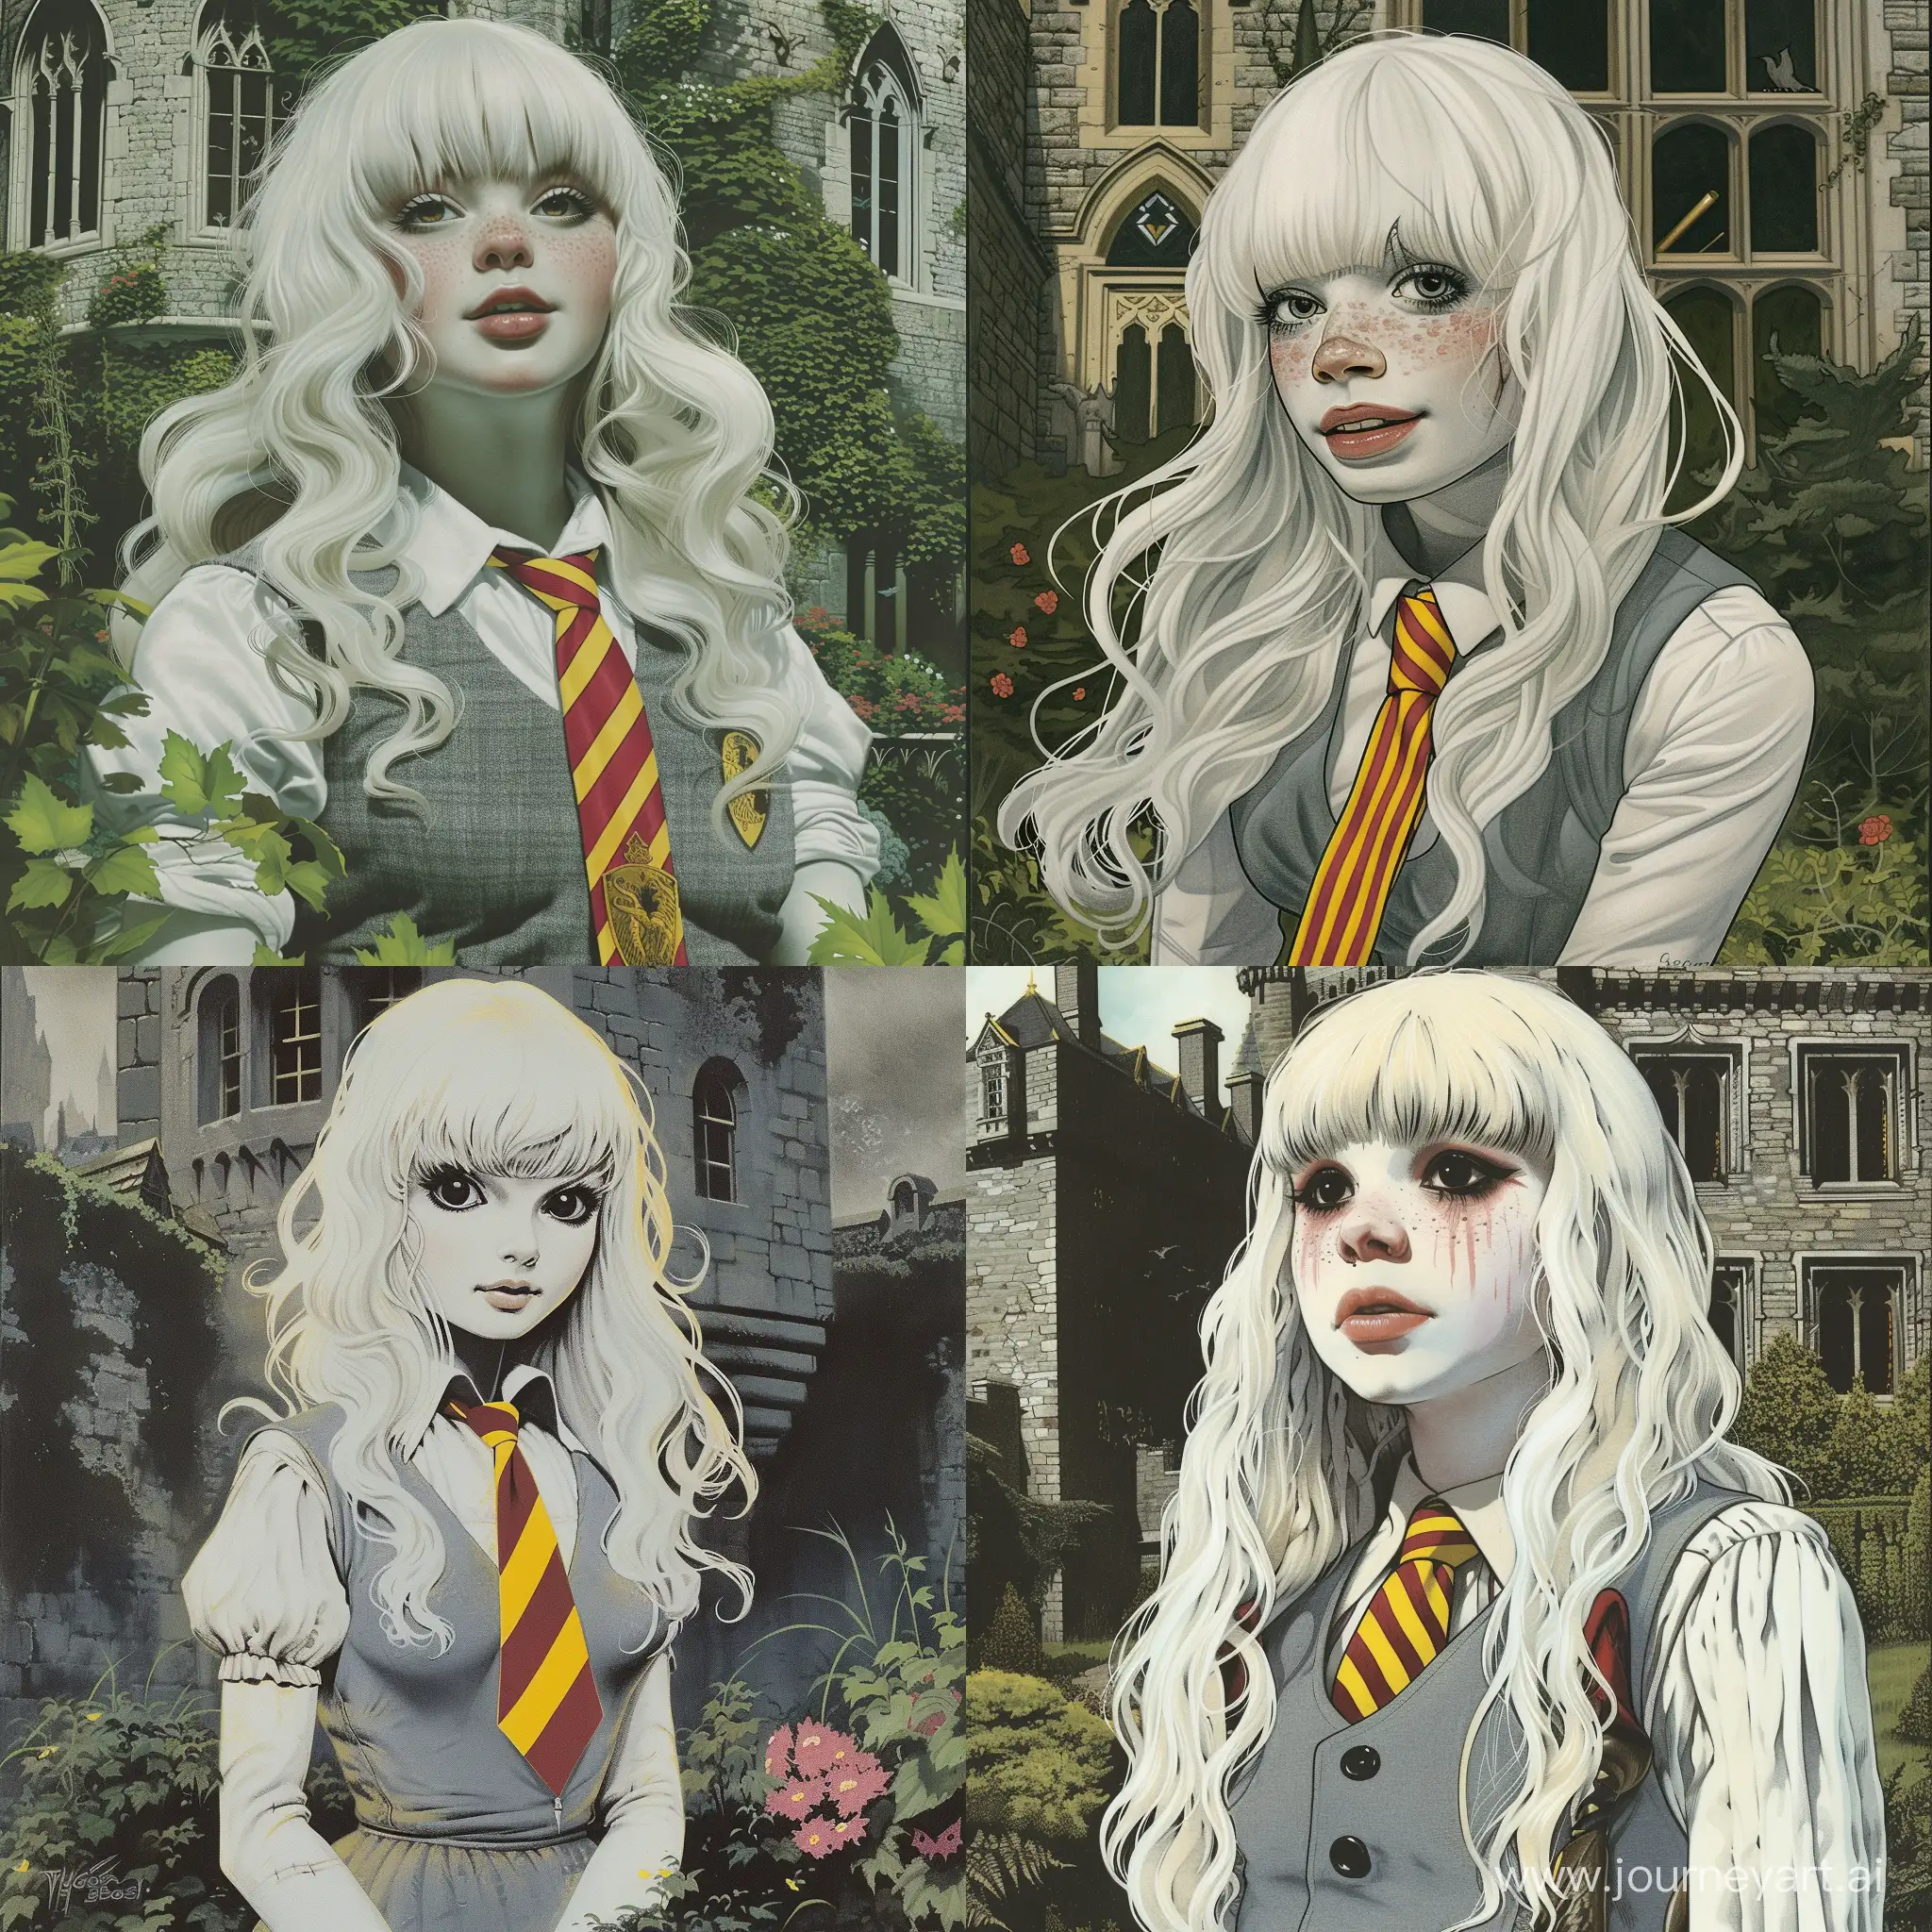 beautiful young woman, 15 years old, white skin and long wavy blonde hair with bangs. black eyes and a round face with large rosy cheeks. She is in the garden of an English castle, wearing a gray waistcoat and a yellow and red striped Gryffindor tie. Hogwarts. Harry Potter Universe. 80s dark fantasy cover art illustration. Frank Franzetta and Gerald Brom inspired.